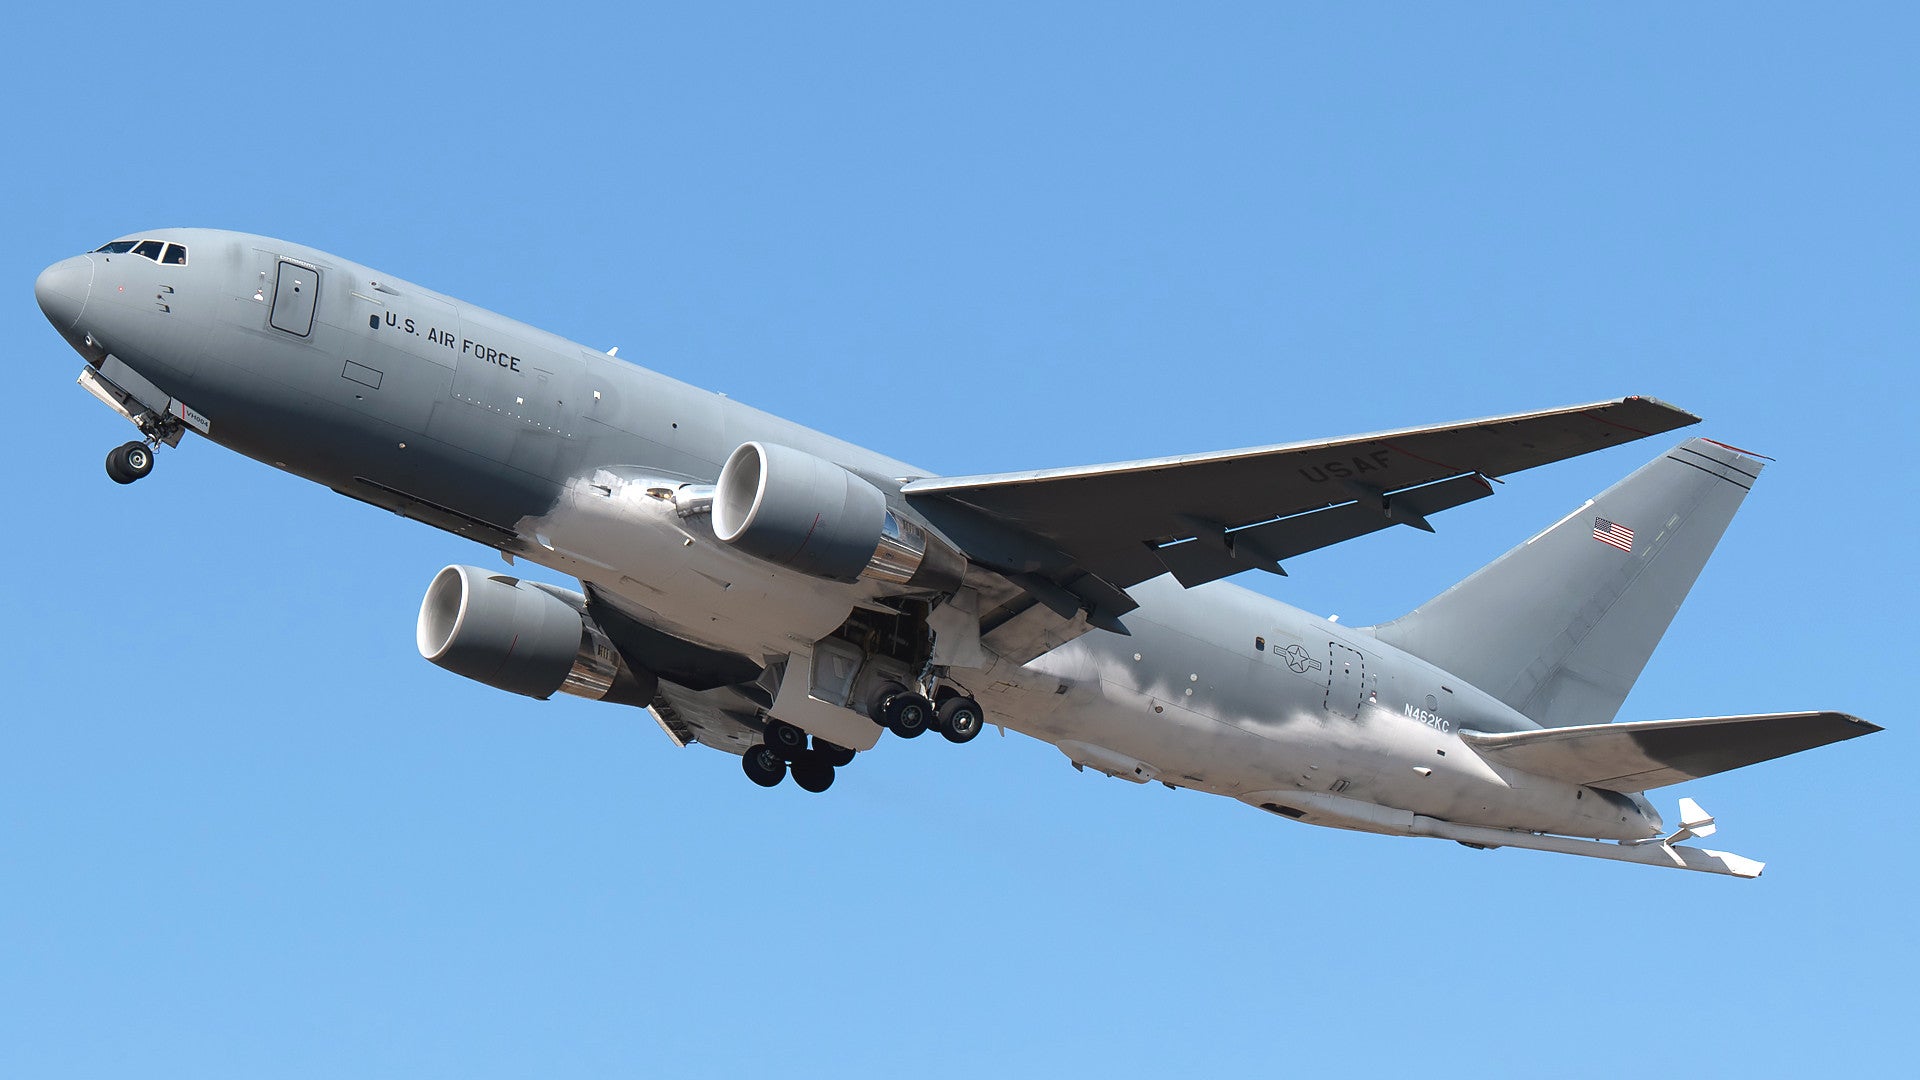 A Boeing KC-46A aerial refueling tanker with areas of the underside of its fuselage, wings, and rear stabilizers covered with some kind of white coating.